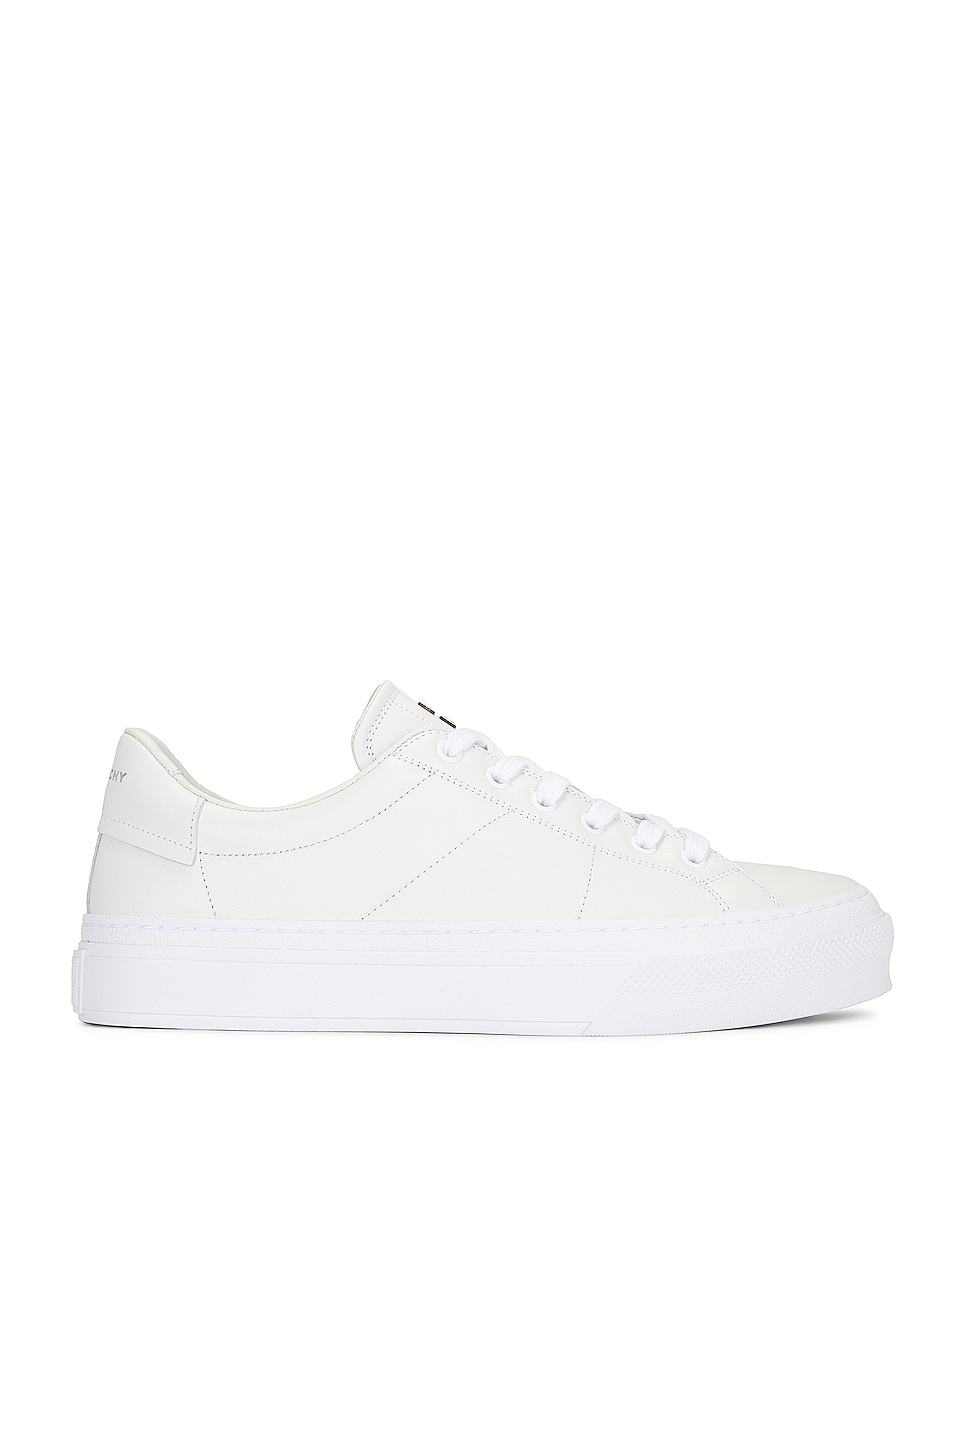 Image 1 of Givenchy City Sport Lace Up Sneaker in White